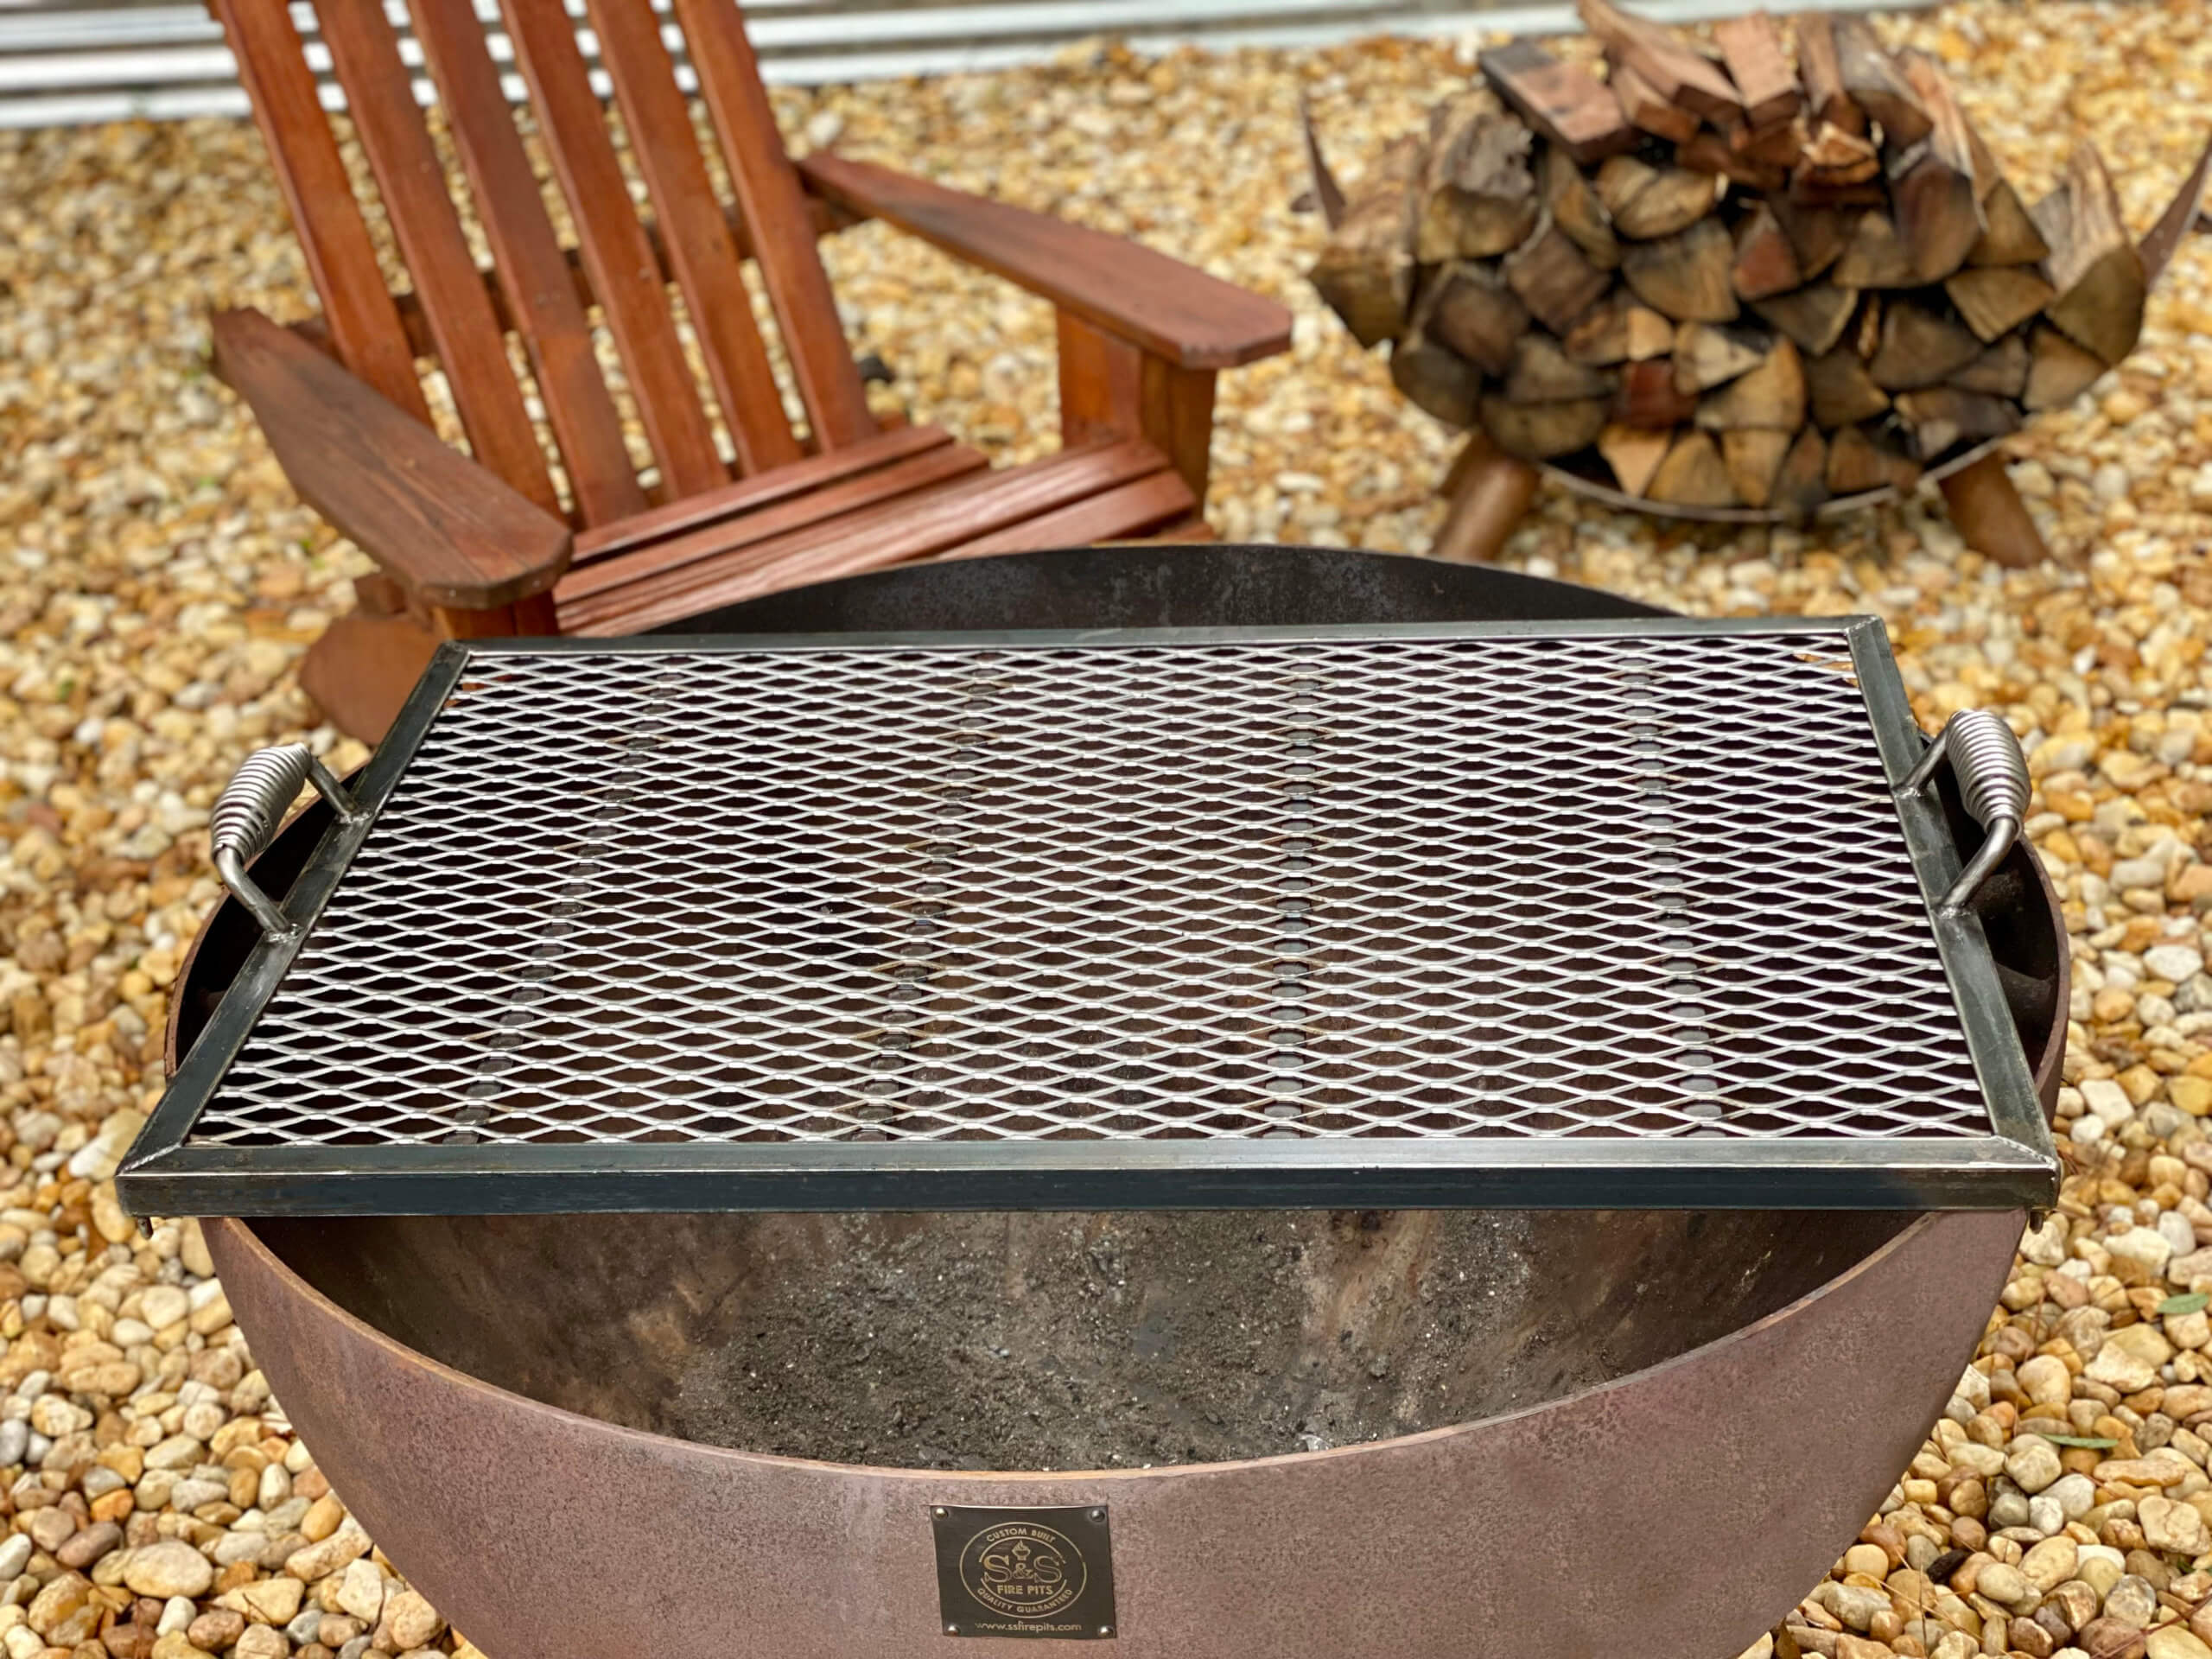 41 Heavy Duty Handcrafted Fire Pit, Steel Fire Pit Ring With Cooking Grates